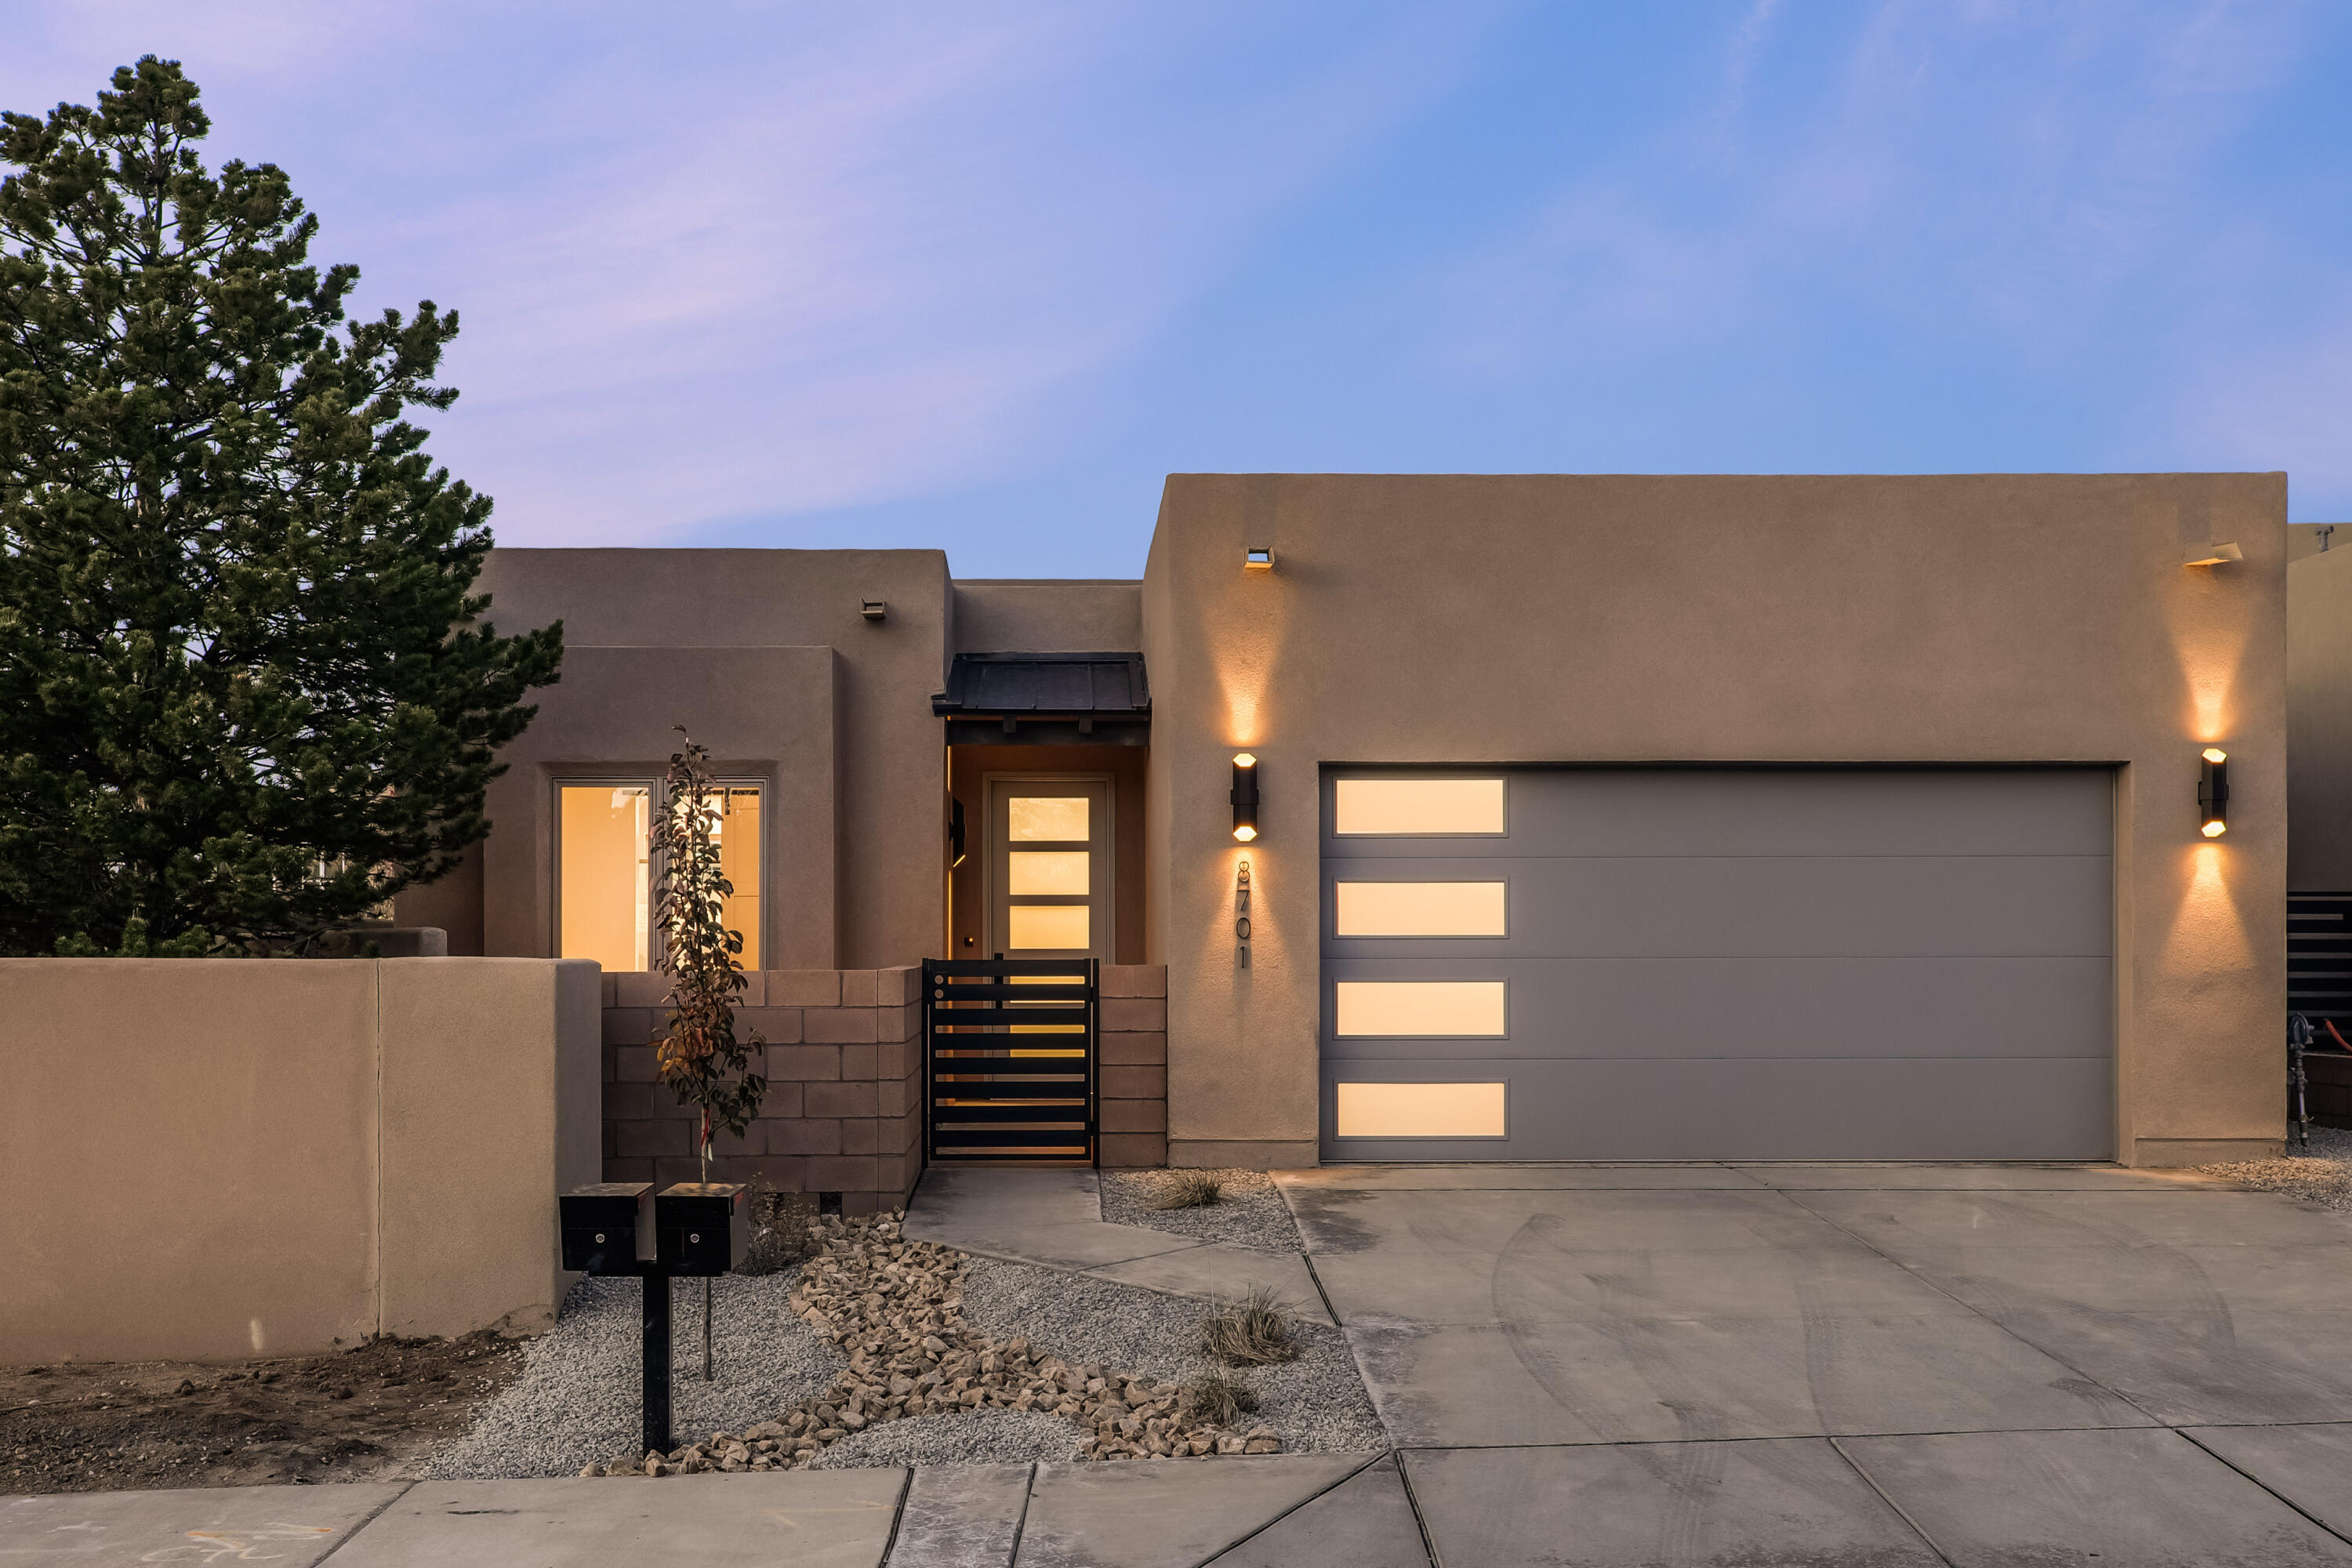 Welcome to this new construction, one-story home located in the heart of Albuquerque. This property boasts three spacious bedrooms, all designed with modern aesthetics and comfort in mind. Built by Las Ventanas Homes, a local builder known for their commitment to quality and attention to detail. NM Green Build Silver Certified, meeting high standards for energy efficiency. You'll be greeted by a modern open floor plan that seamlessly connects the living areas, creating a perfect space for entertaining or family gatherings. Kitchen is equipped with state-of-the art appliances and sleek countertops. Each bedroom offers generous space, large windows that allow for plenty of light